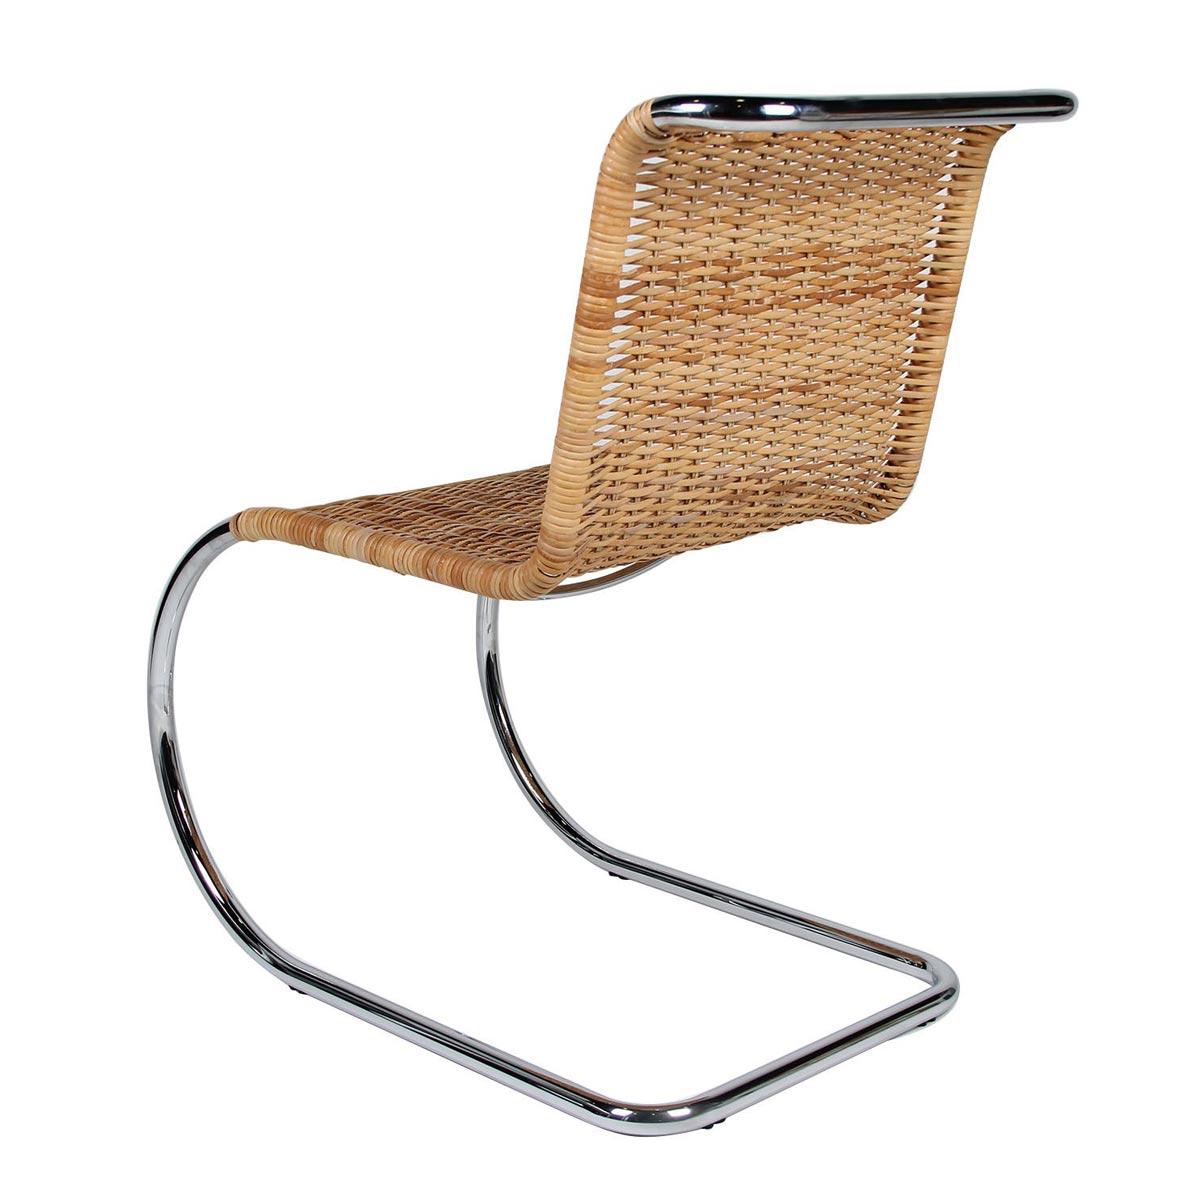 Plated Ludwig Mies van der Rohe Woven Cane Armless MR 10 Chairs for Alivar, 1980